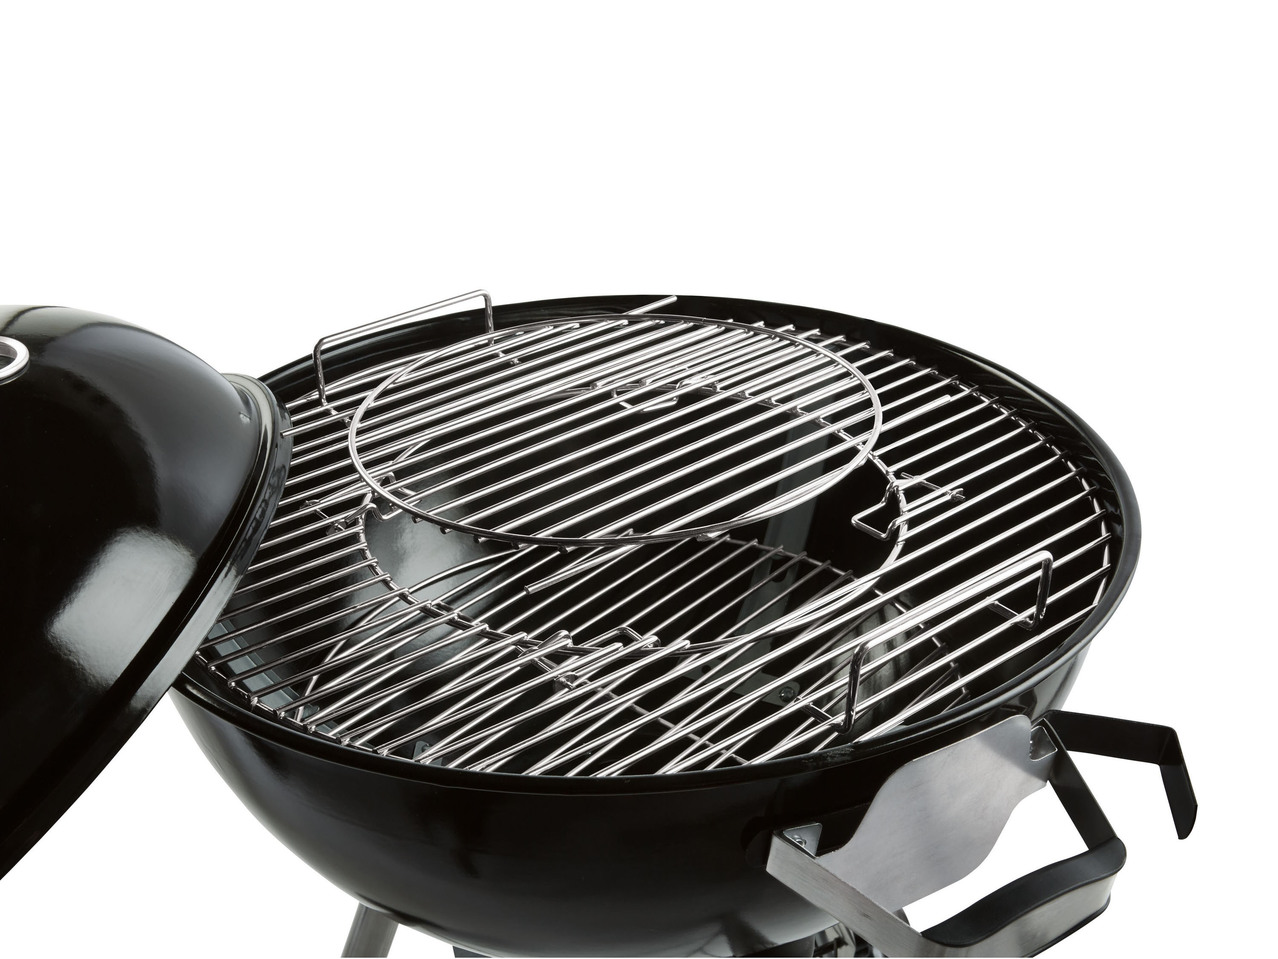 Charcoal Kettle Barbecue with Interchangeable Grate